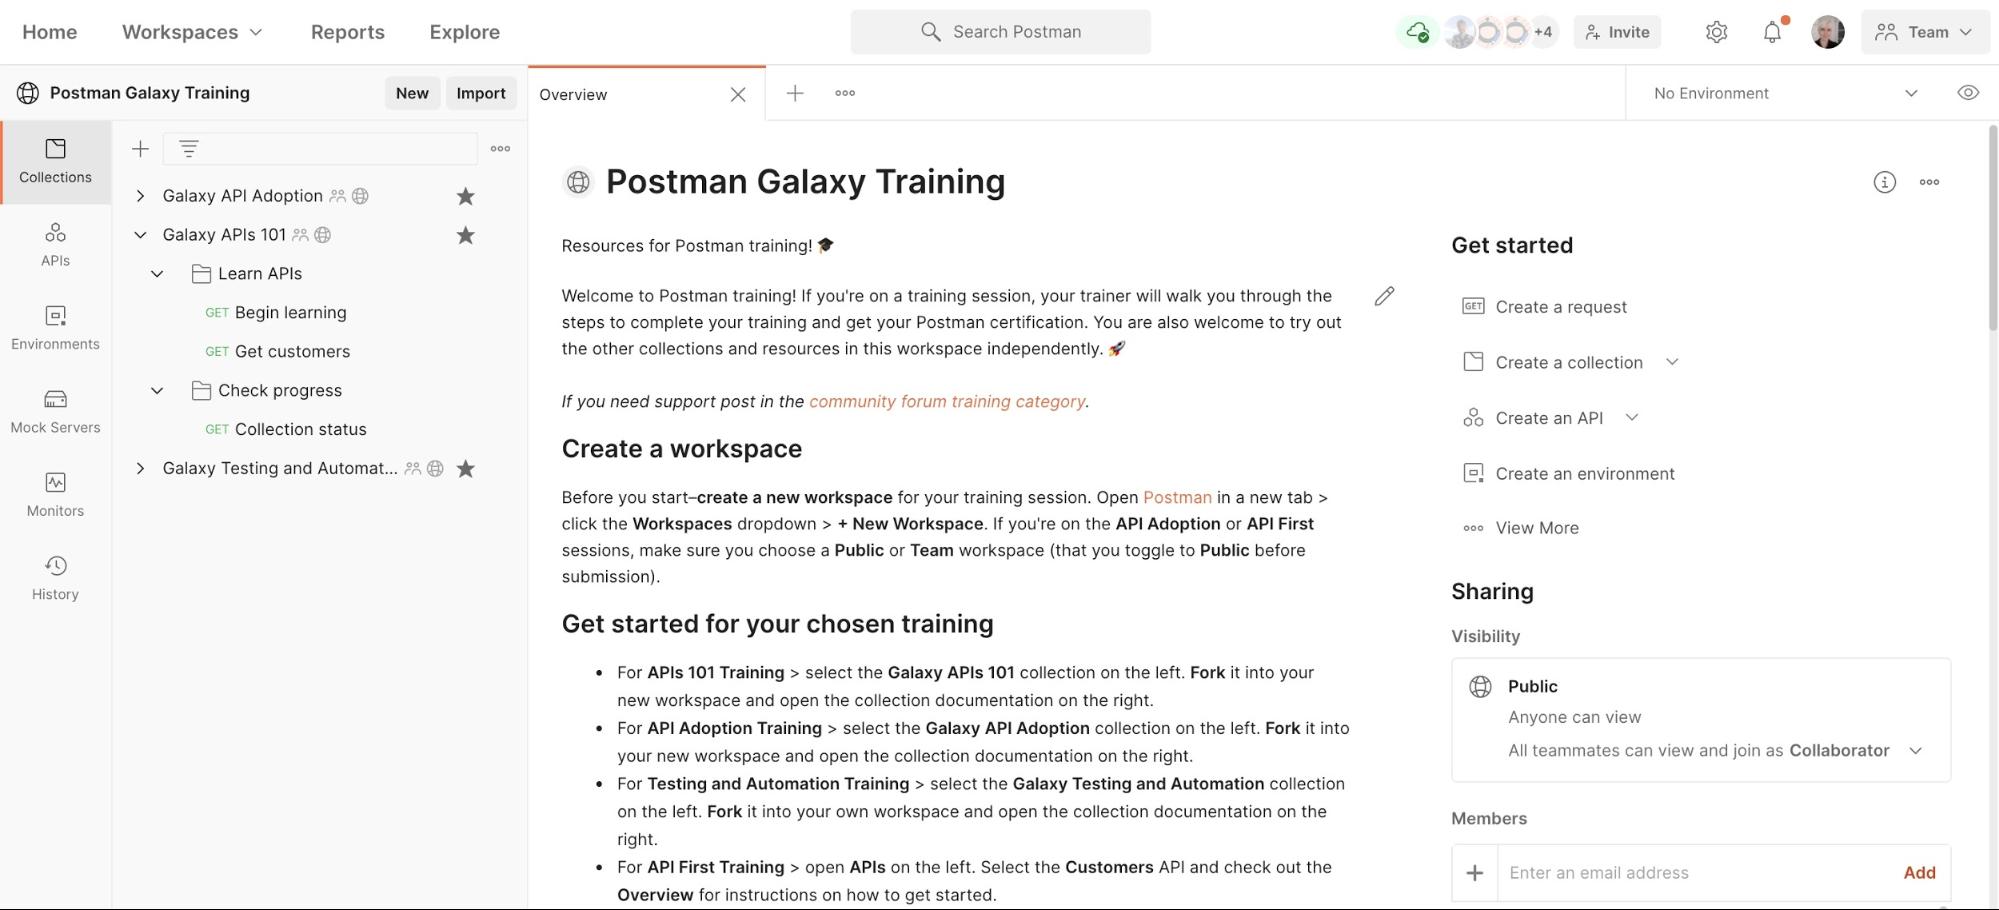 Postman Galaxy Training Overview page with API training options